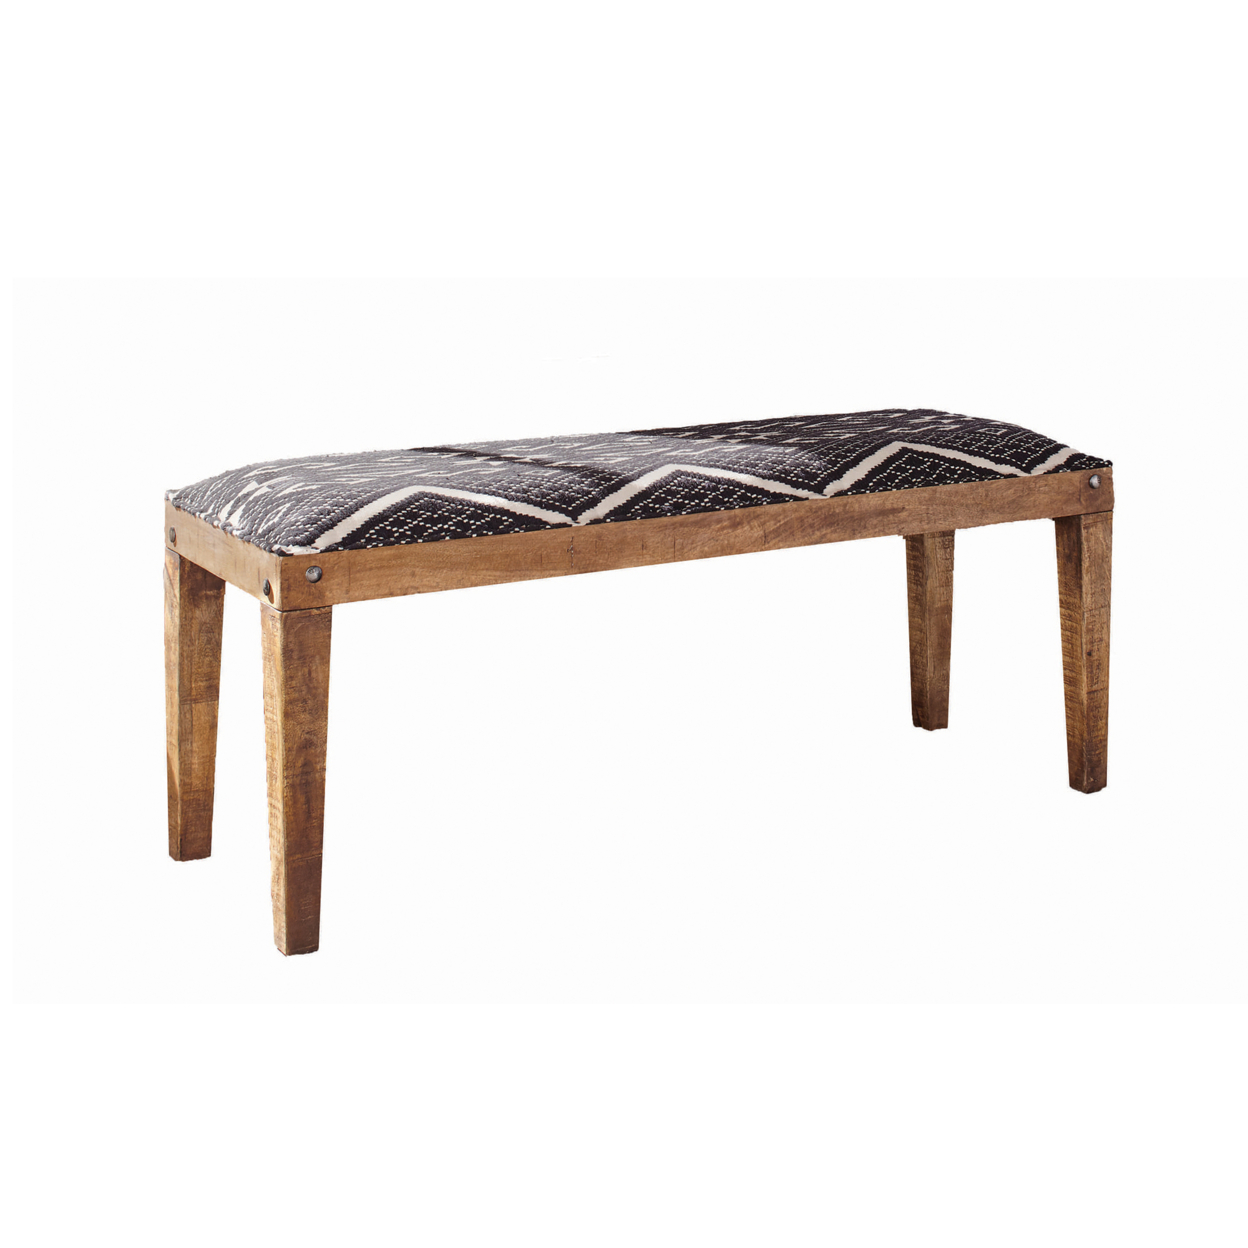 Fabric Upholstered Wooden Bench With Tapered Legs, Brown And Blue- Saltoro Sherpi